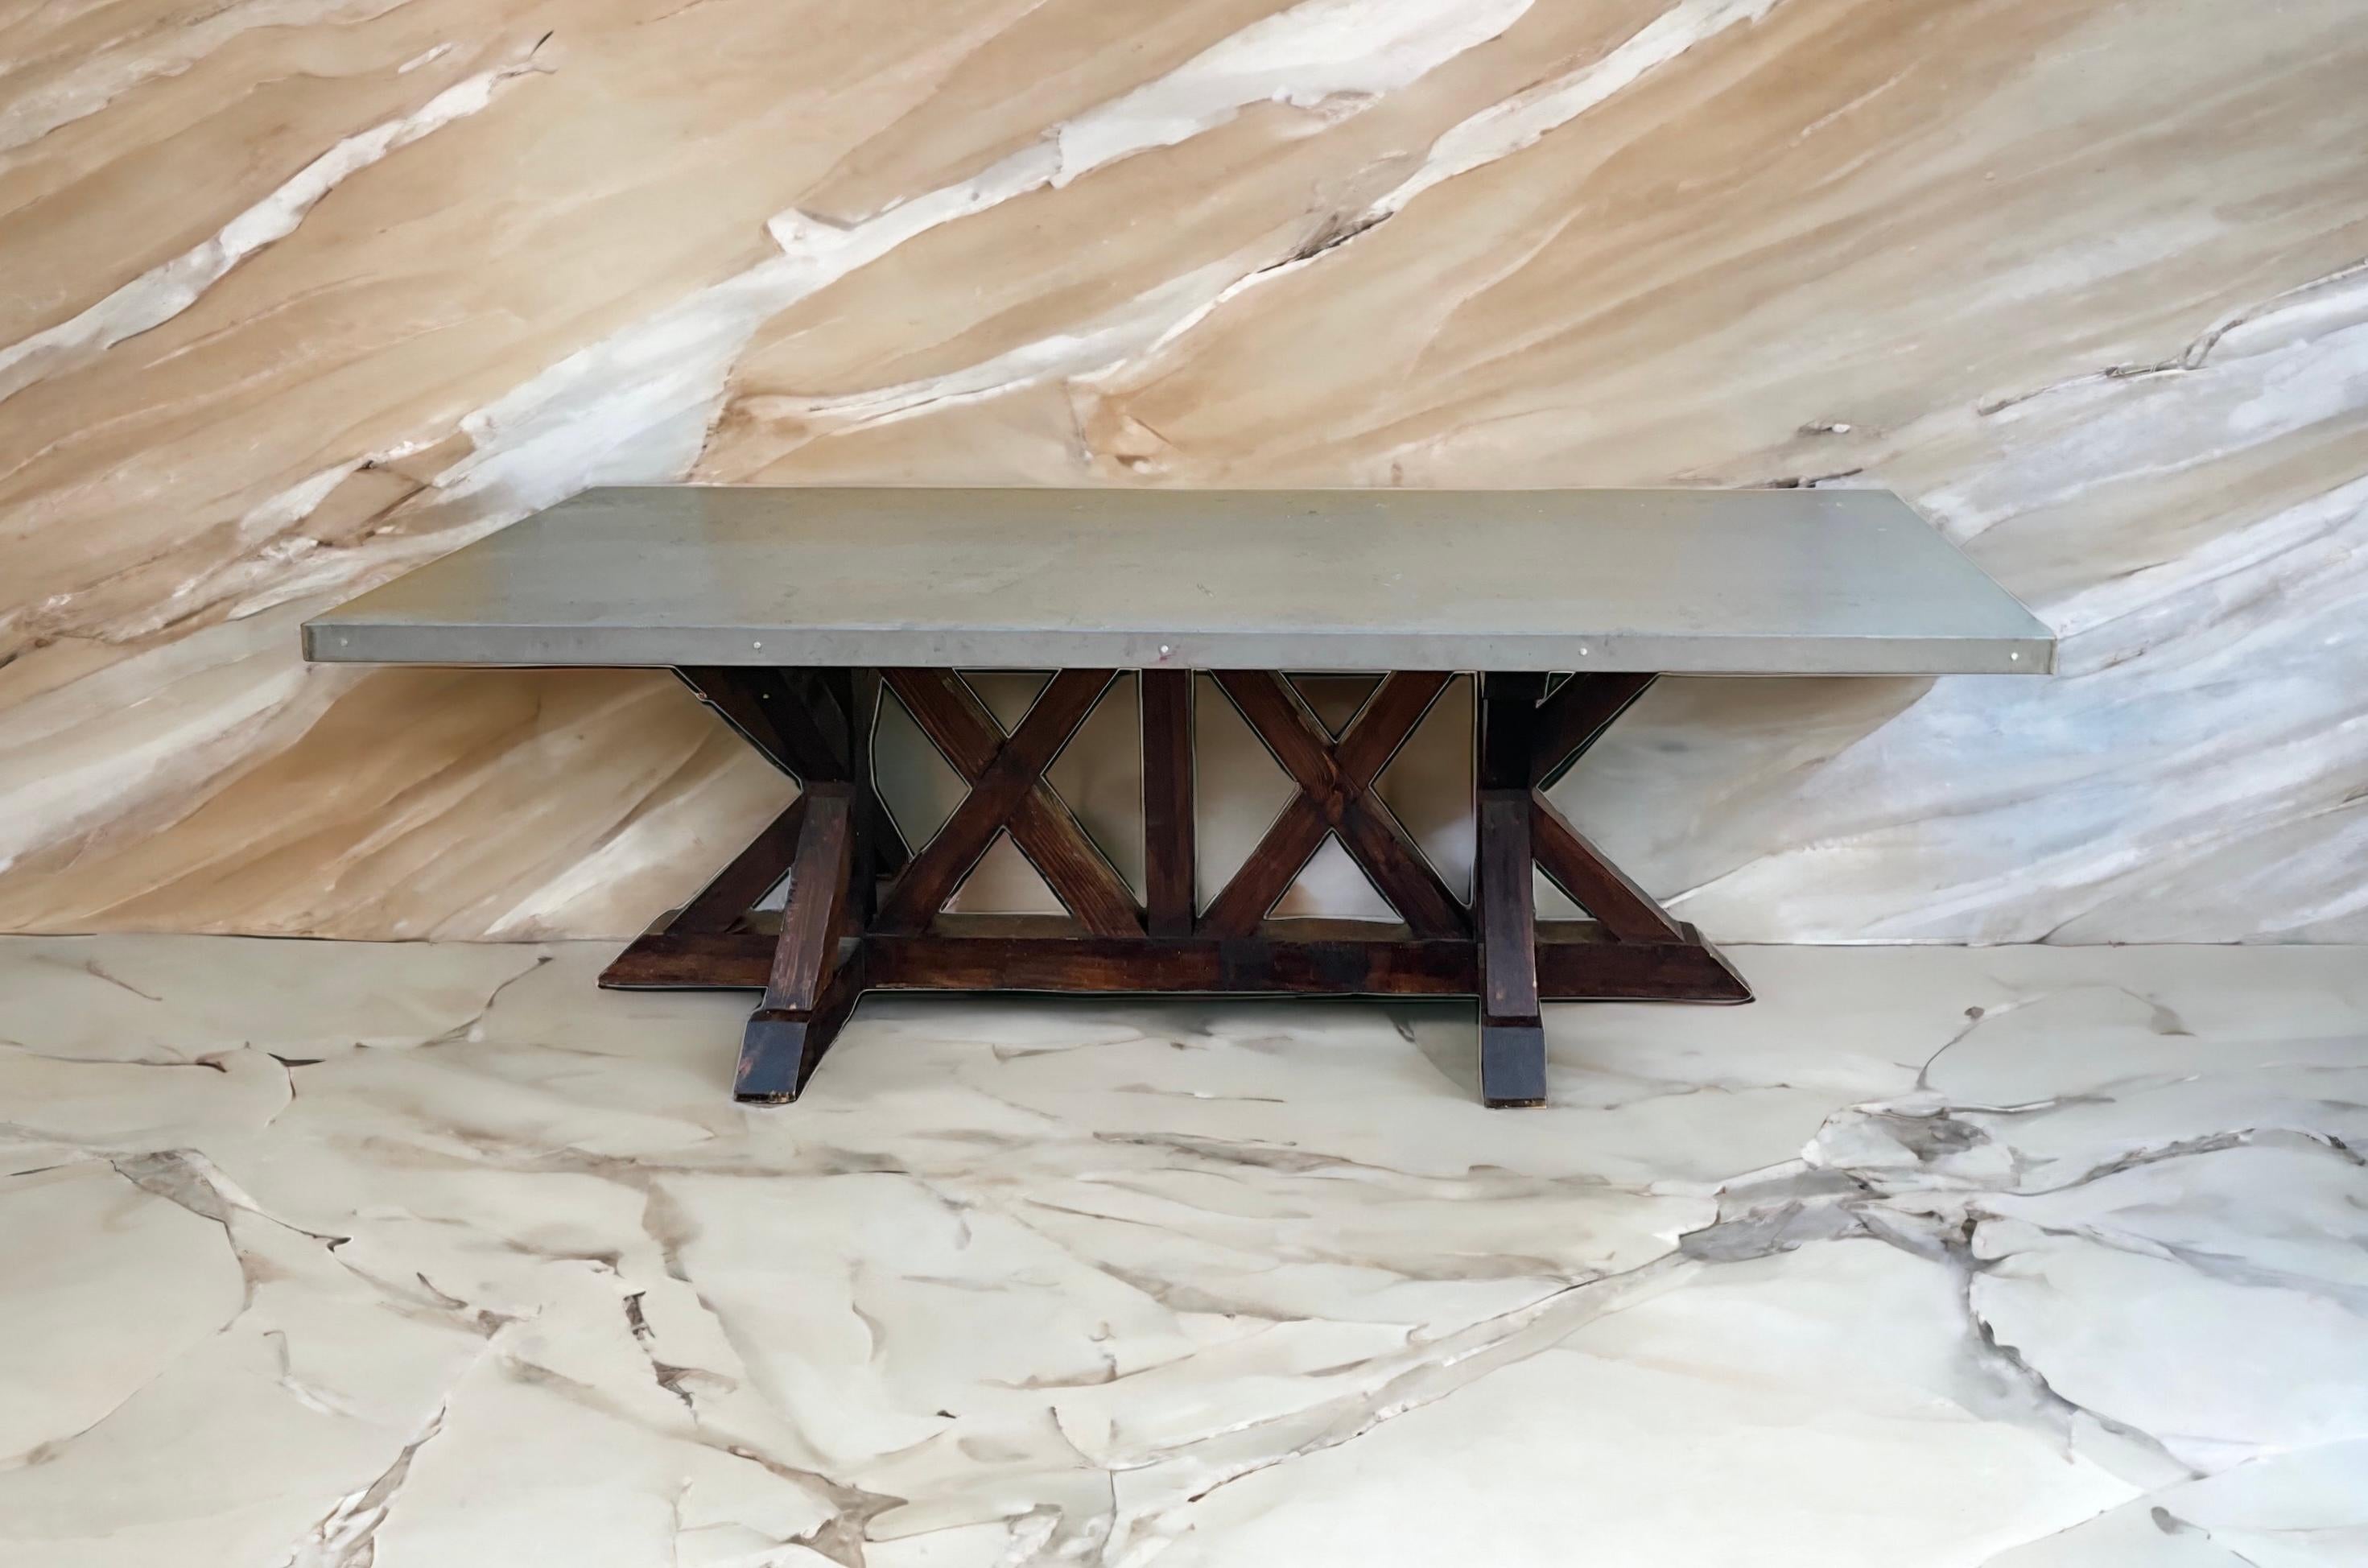 This is just in time for the holidays! It is a large scale primitive farm table with a zinc top and stained oak trestle base. It is less than ten years old and was hand hewn in the United States from responsibly sourced materials. It is in very good